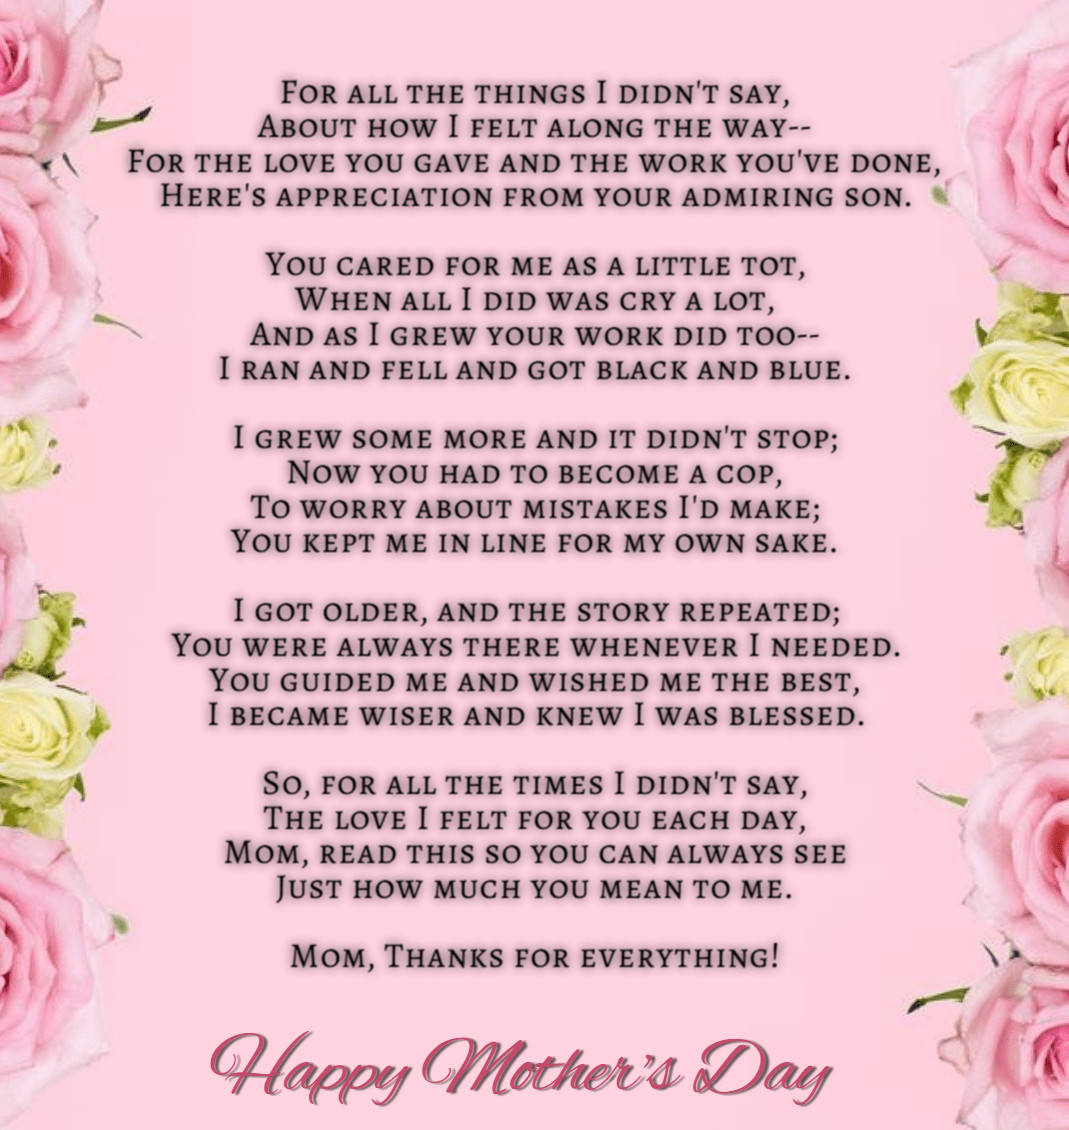 Happy Mothers Day Quotes From Son
 25 Best Mothers Day Poems 2020 to Make your Mom Emotional